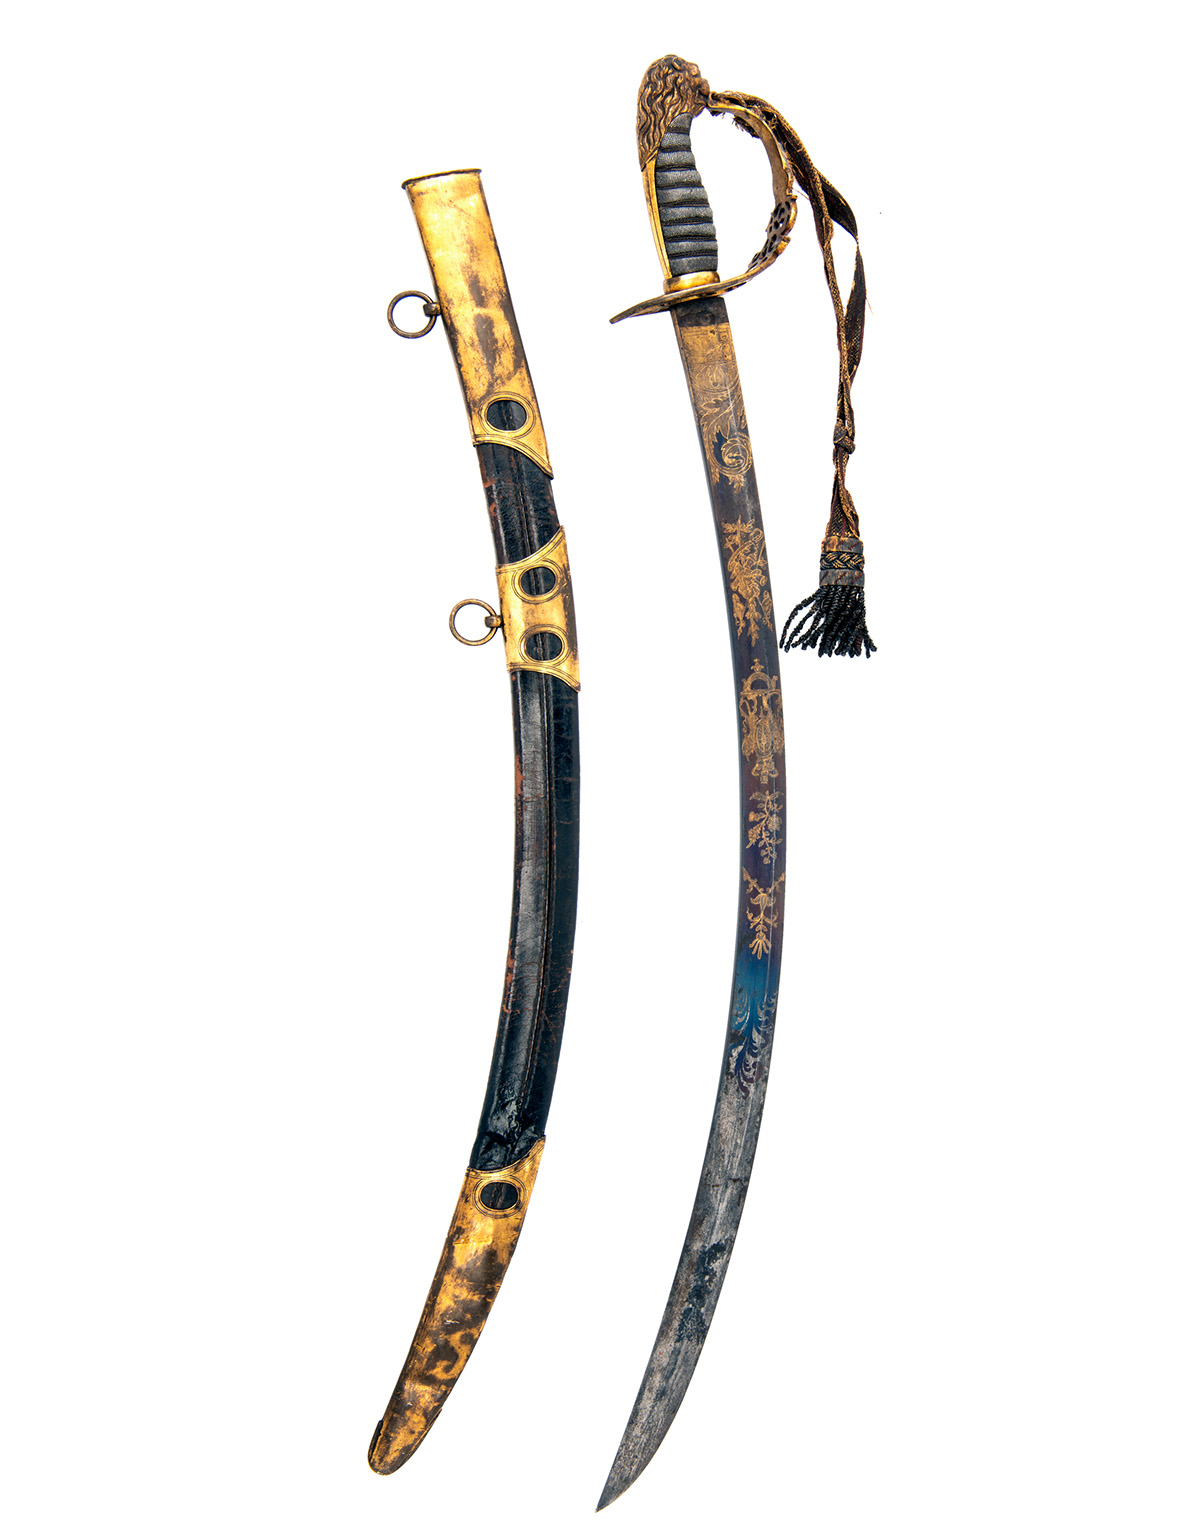 A BRITISH 1803 PATTERN INFANTRY or FLANK OFFICER'S SWORD WITH BLUE AND GILT BLADE, UNSIGNED, circa - Image 5 of 7